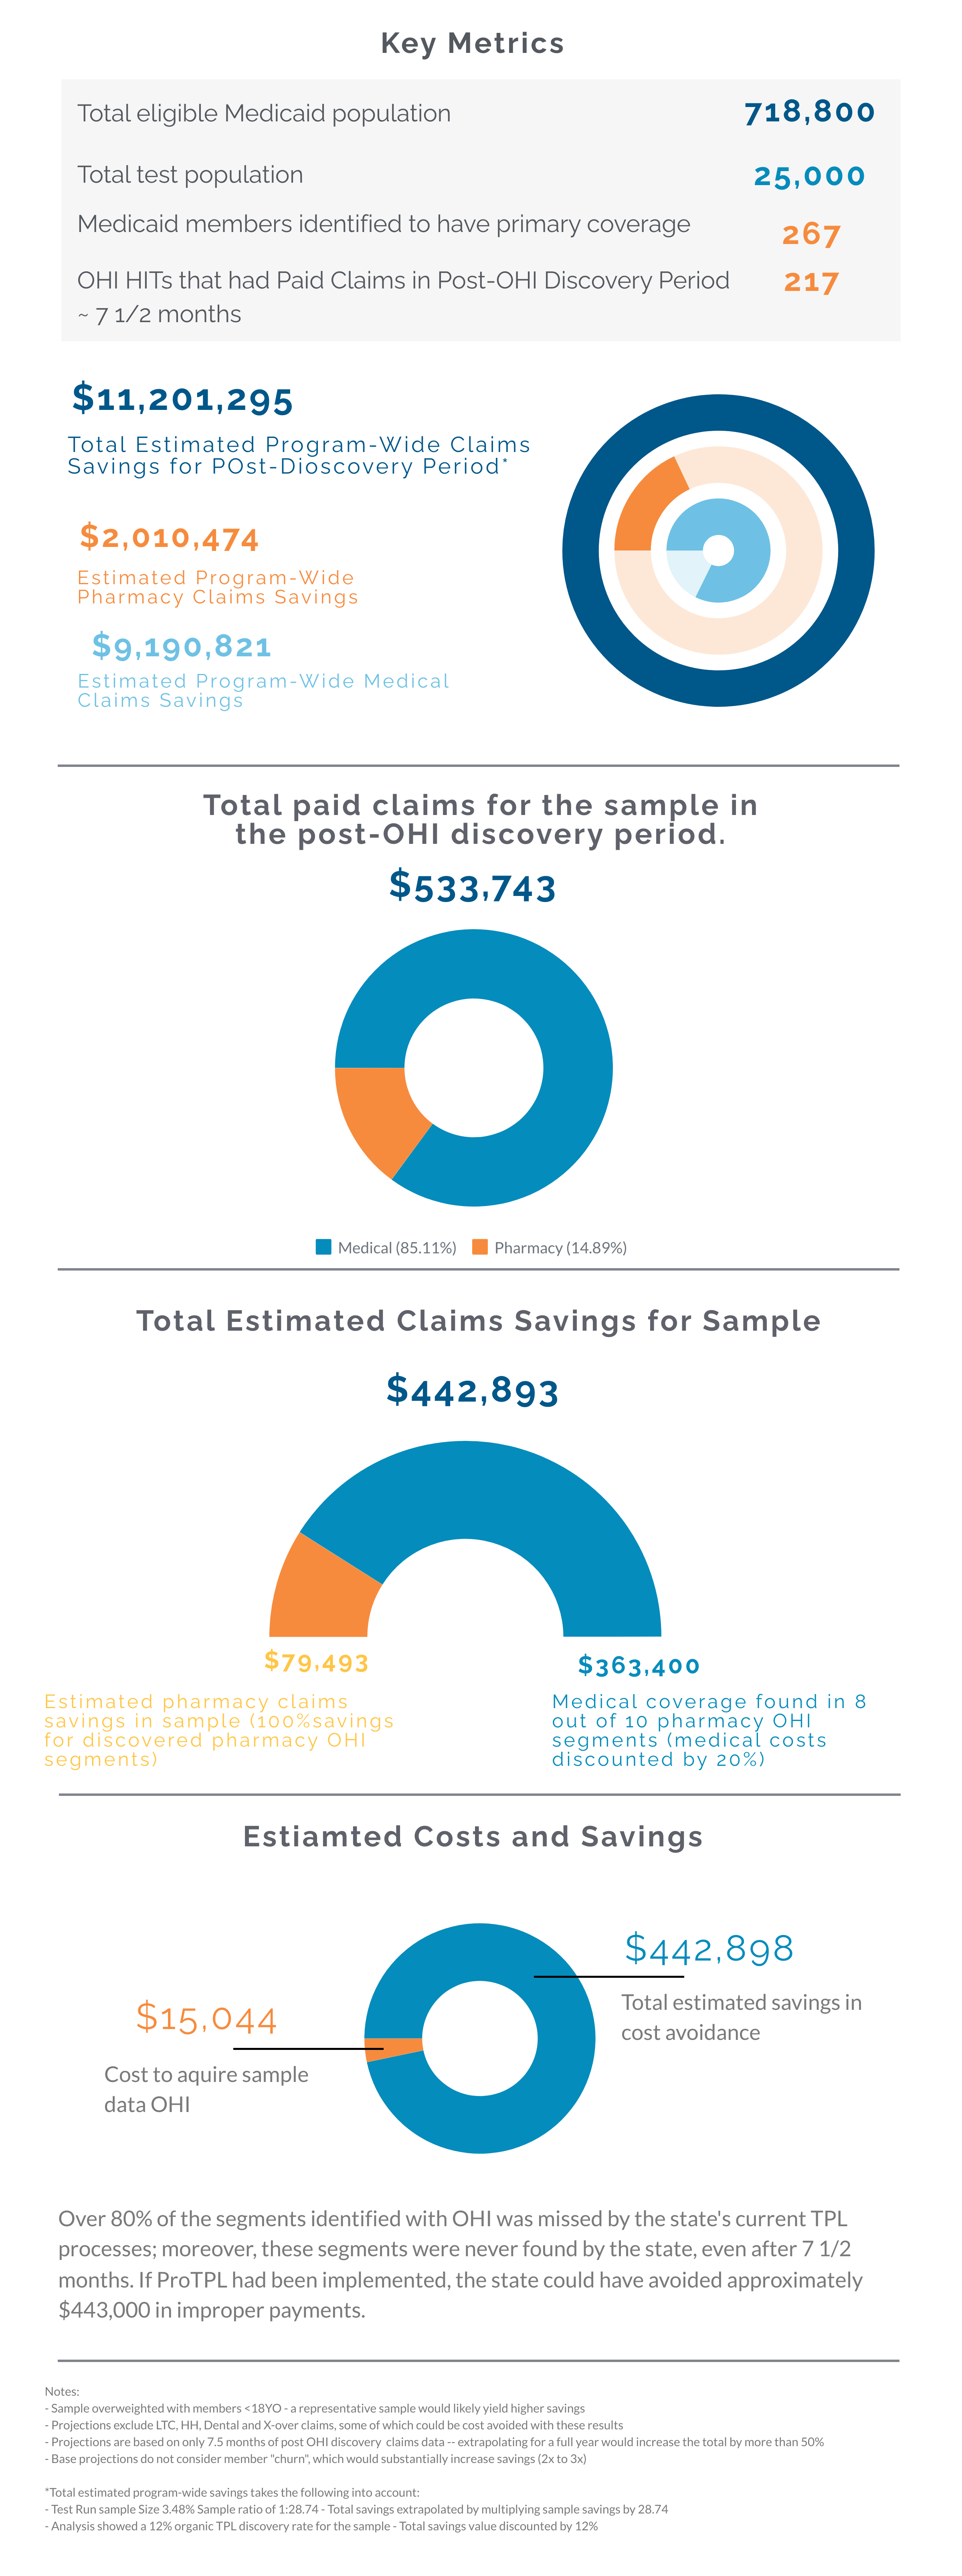 CASE STUDY: TPL RX AND MEDICAL DISCOVERY STATE-RUN FEE FOR SERVICE FFS MEDICAID PROGRAM